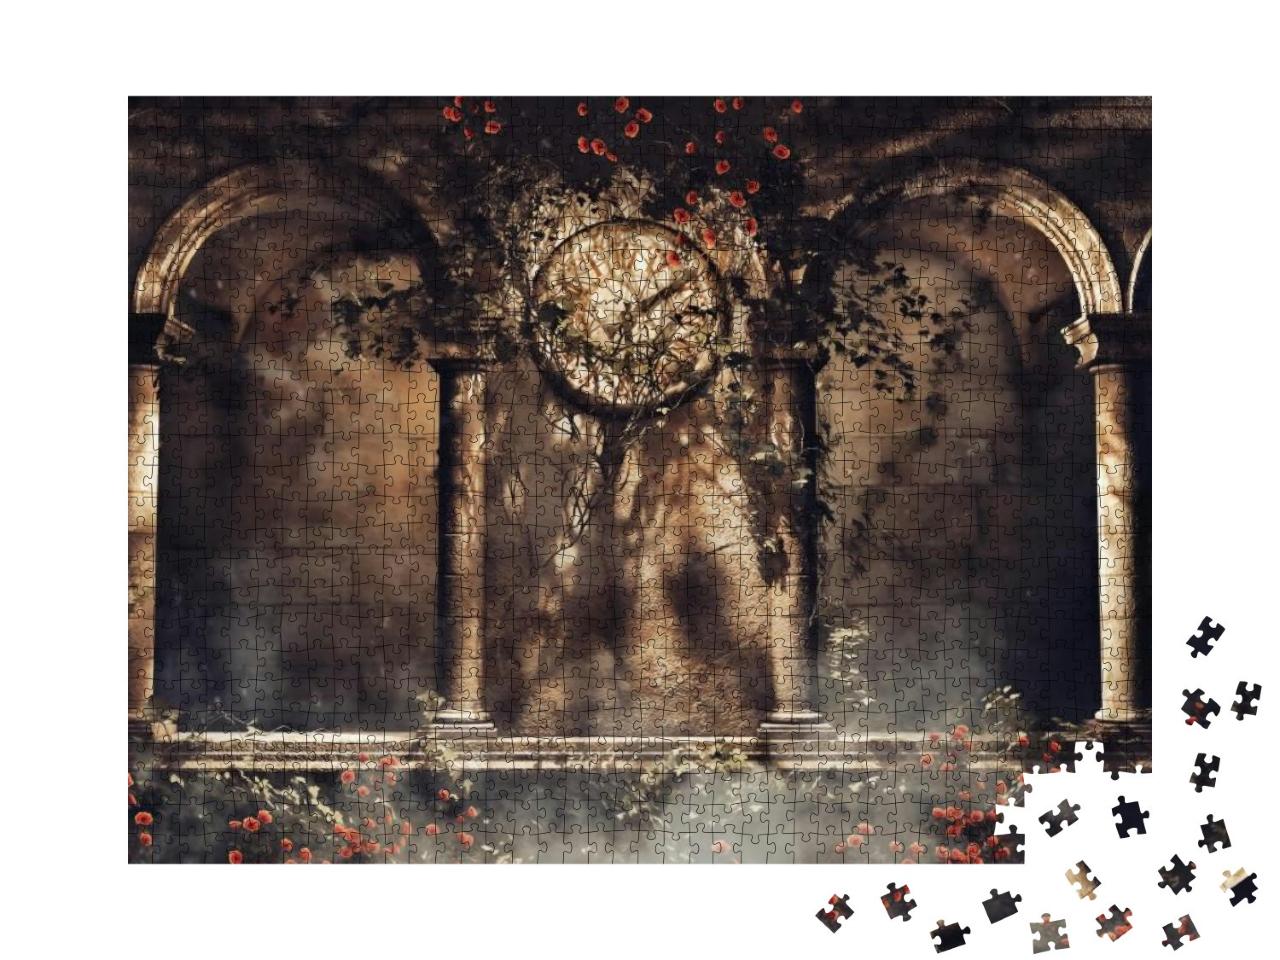 Vintage Gothic Arches with Vines, Roses & an Old Clock. 3... Jigsaw Puzzle with 1000 pieces